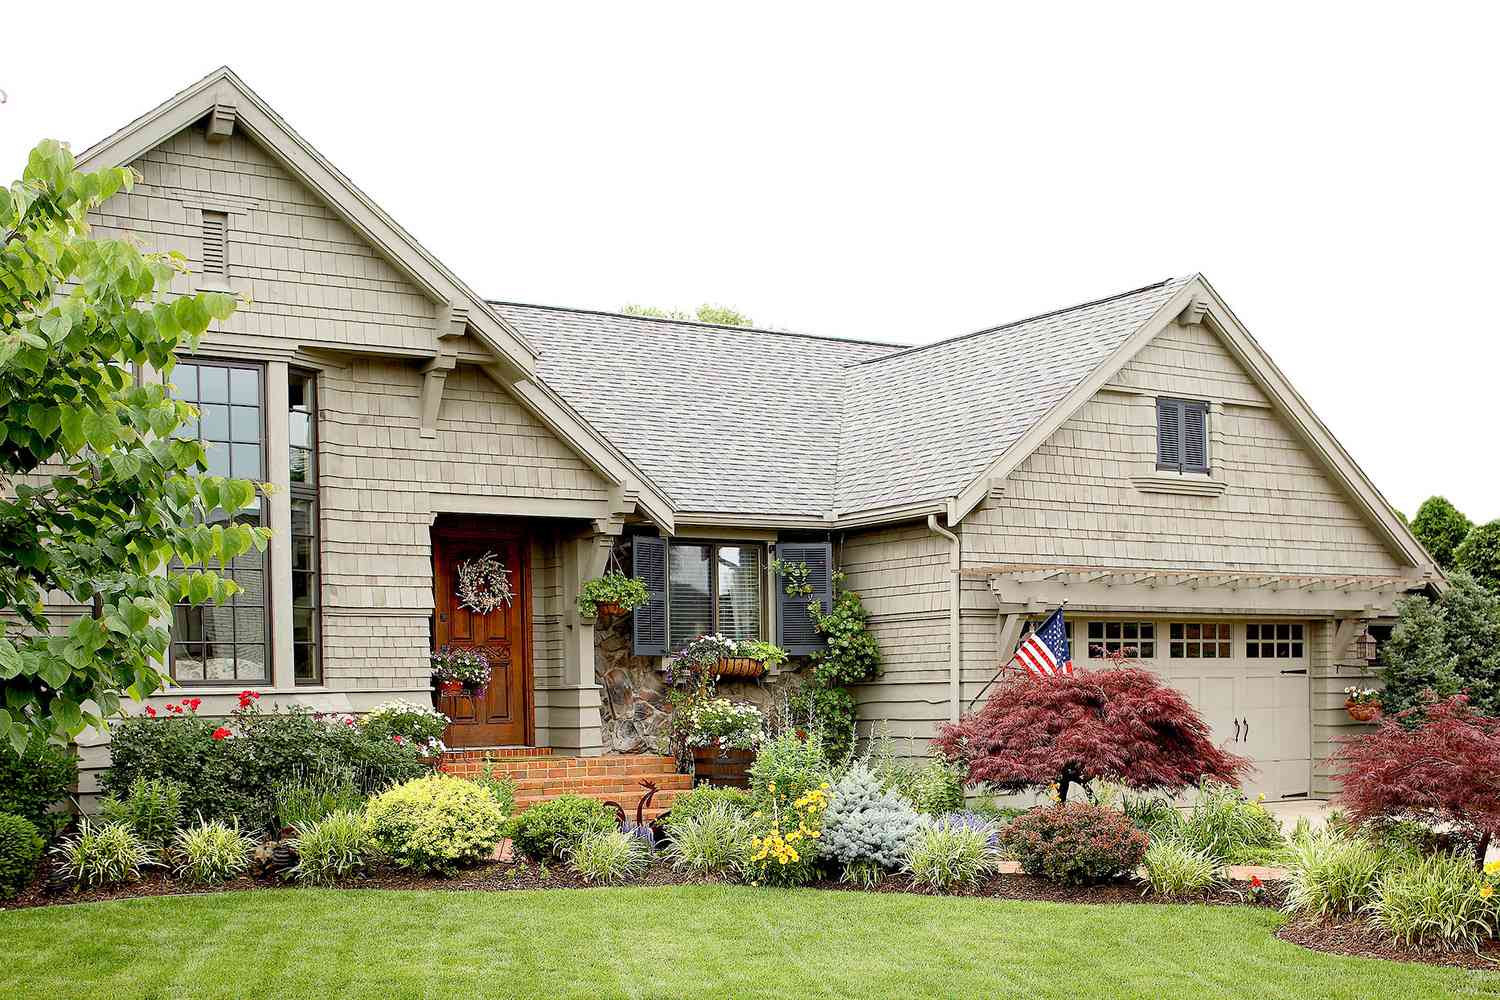 The 5 Really Obvious Ways To Landscaping Better That You Ever Did